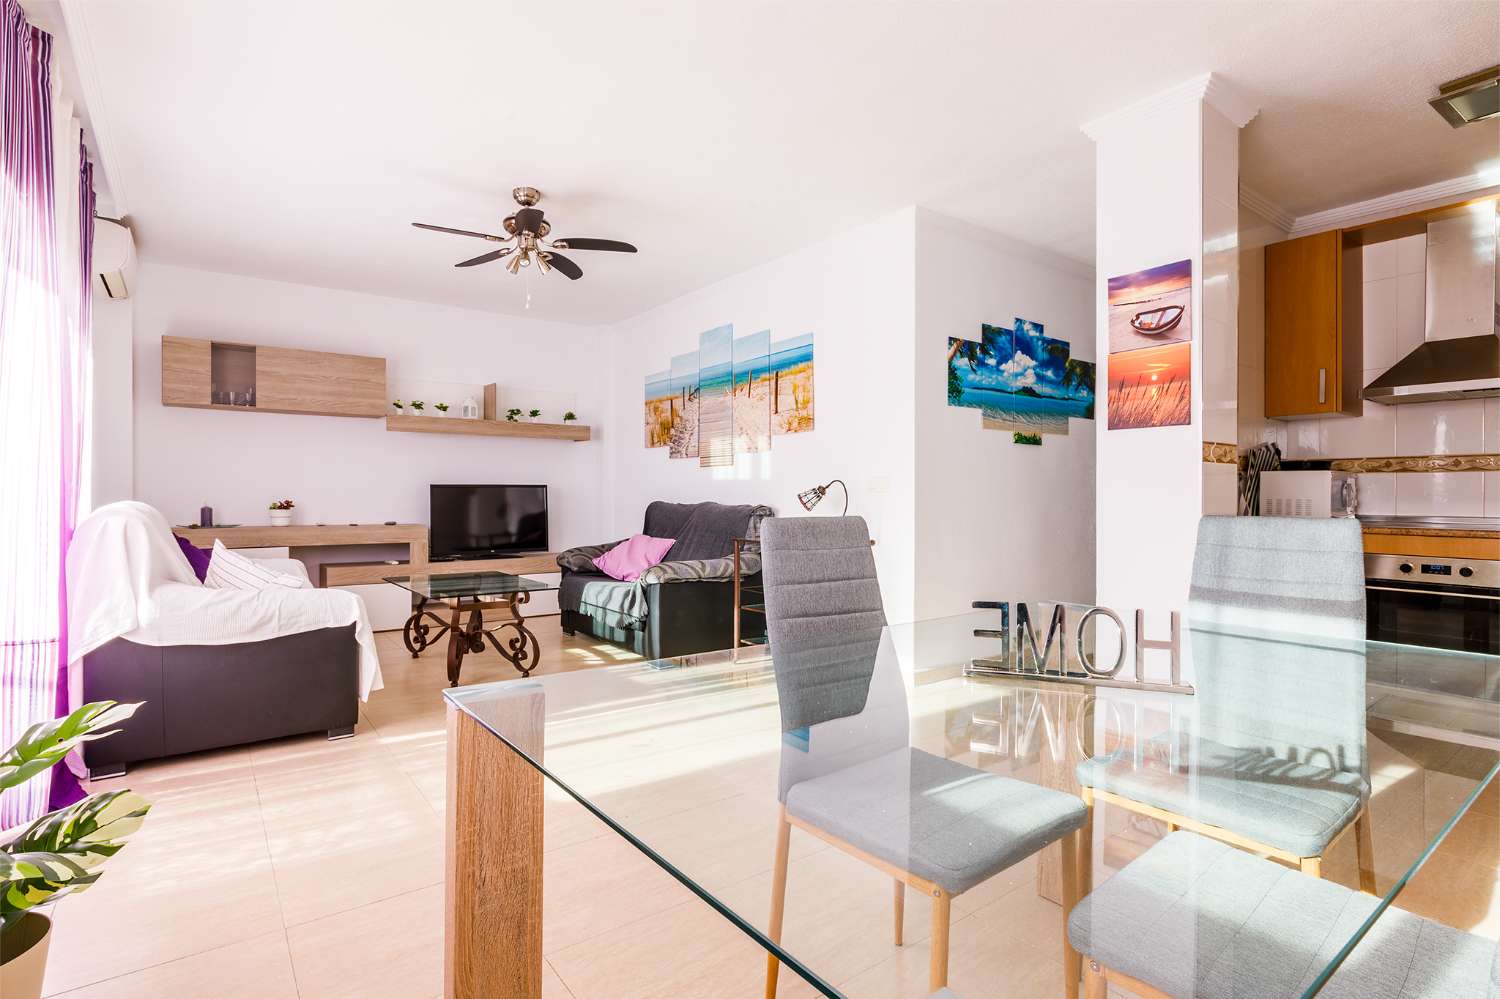 Two bedroom, two bathroom apartment in the center of Torre del Mar, with communal pool